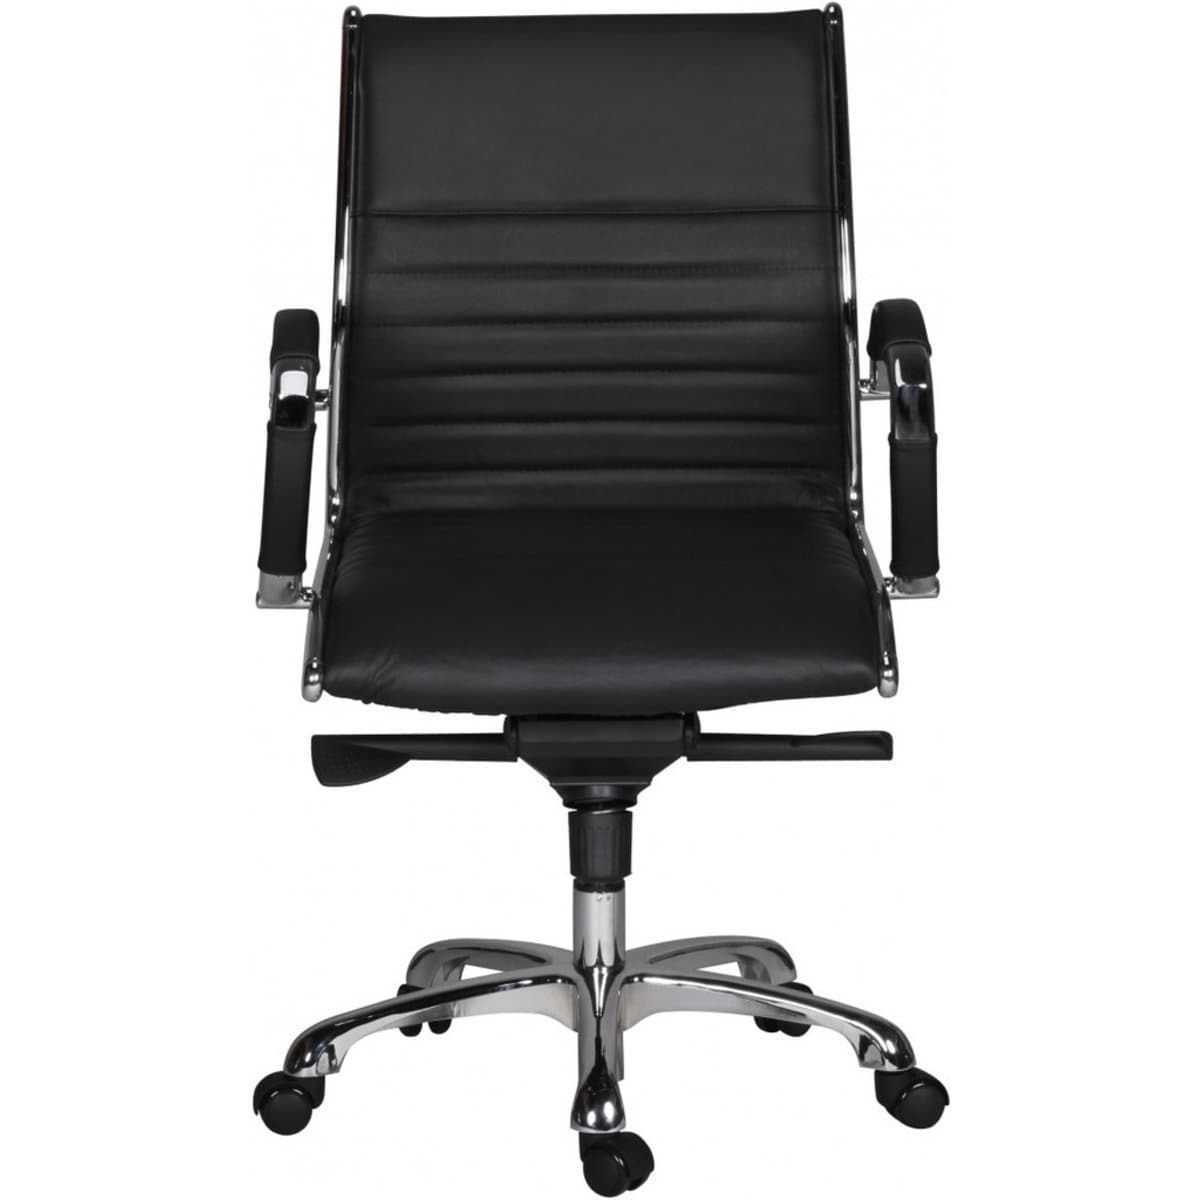 Nancy's Bronx Office Chair Made of Leather - Ergonomic Office Chair - Office Chairs for Adults - Aluminum - Leather